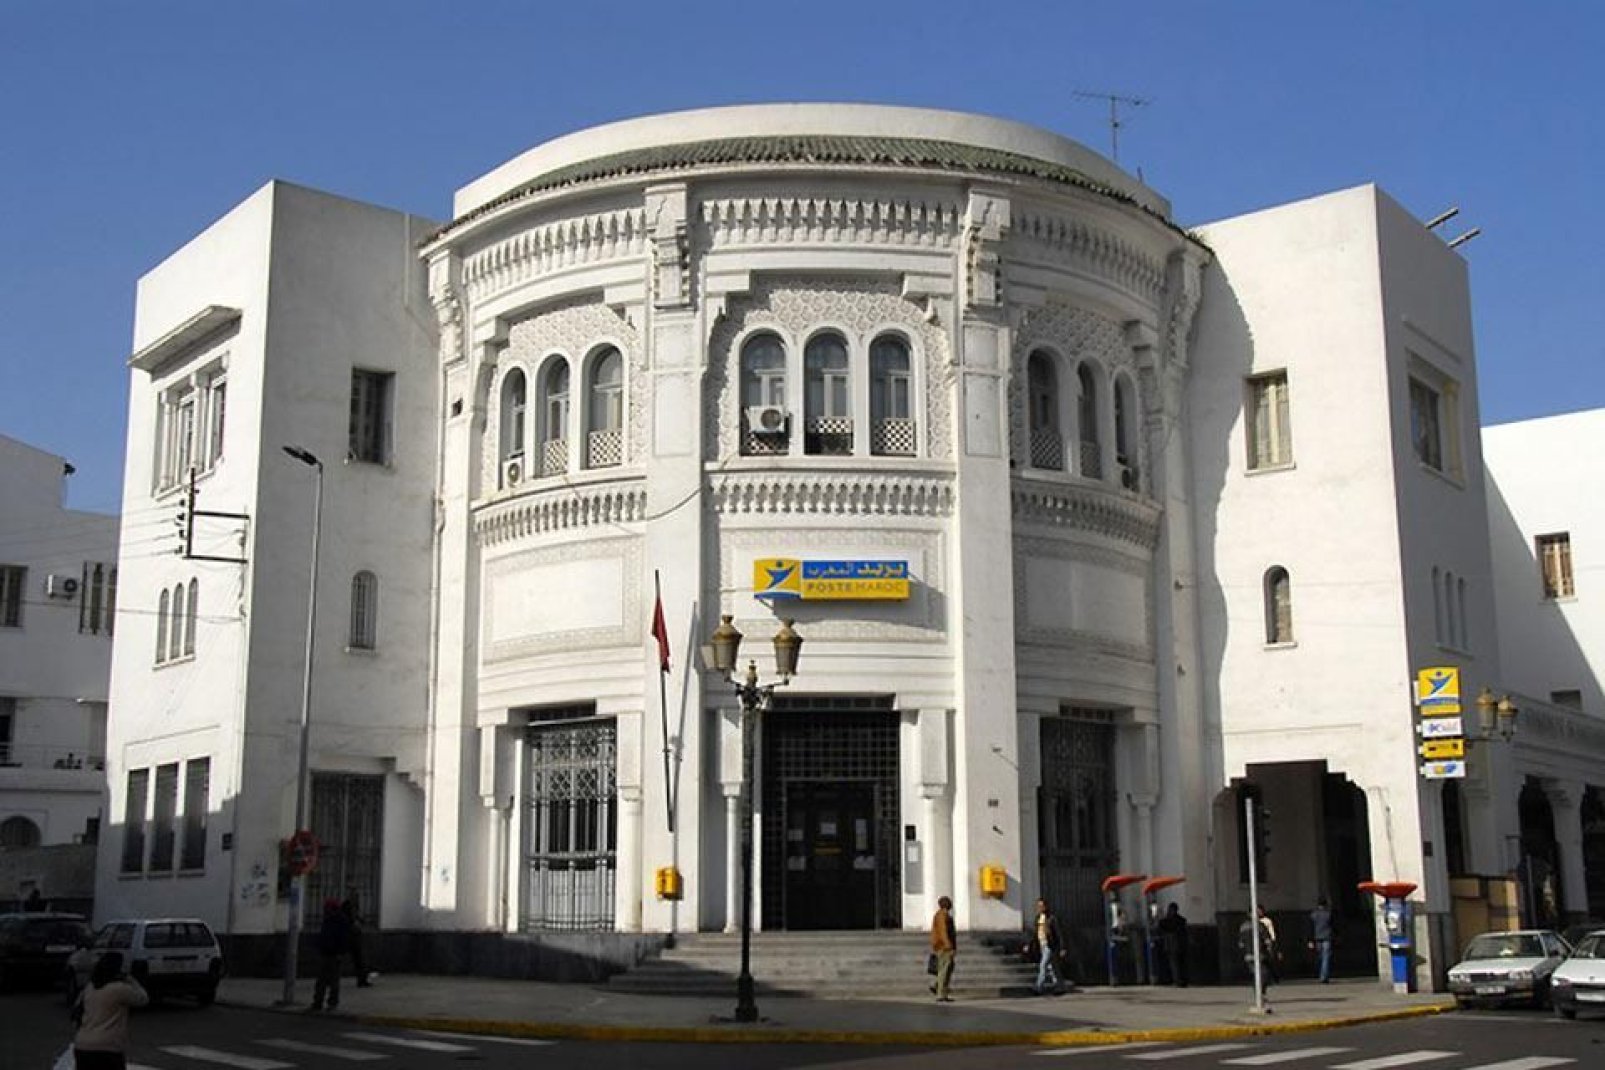 This building, inspired by the Algiers central post office, has housed Casablanca's central post office since 1918.